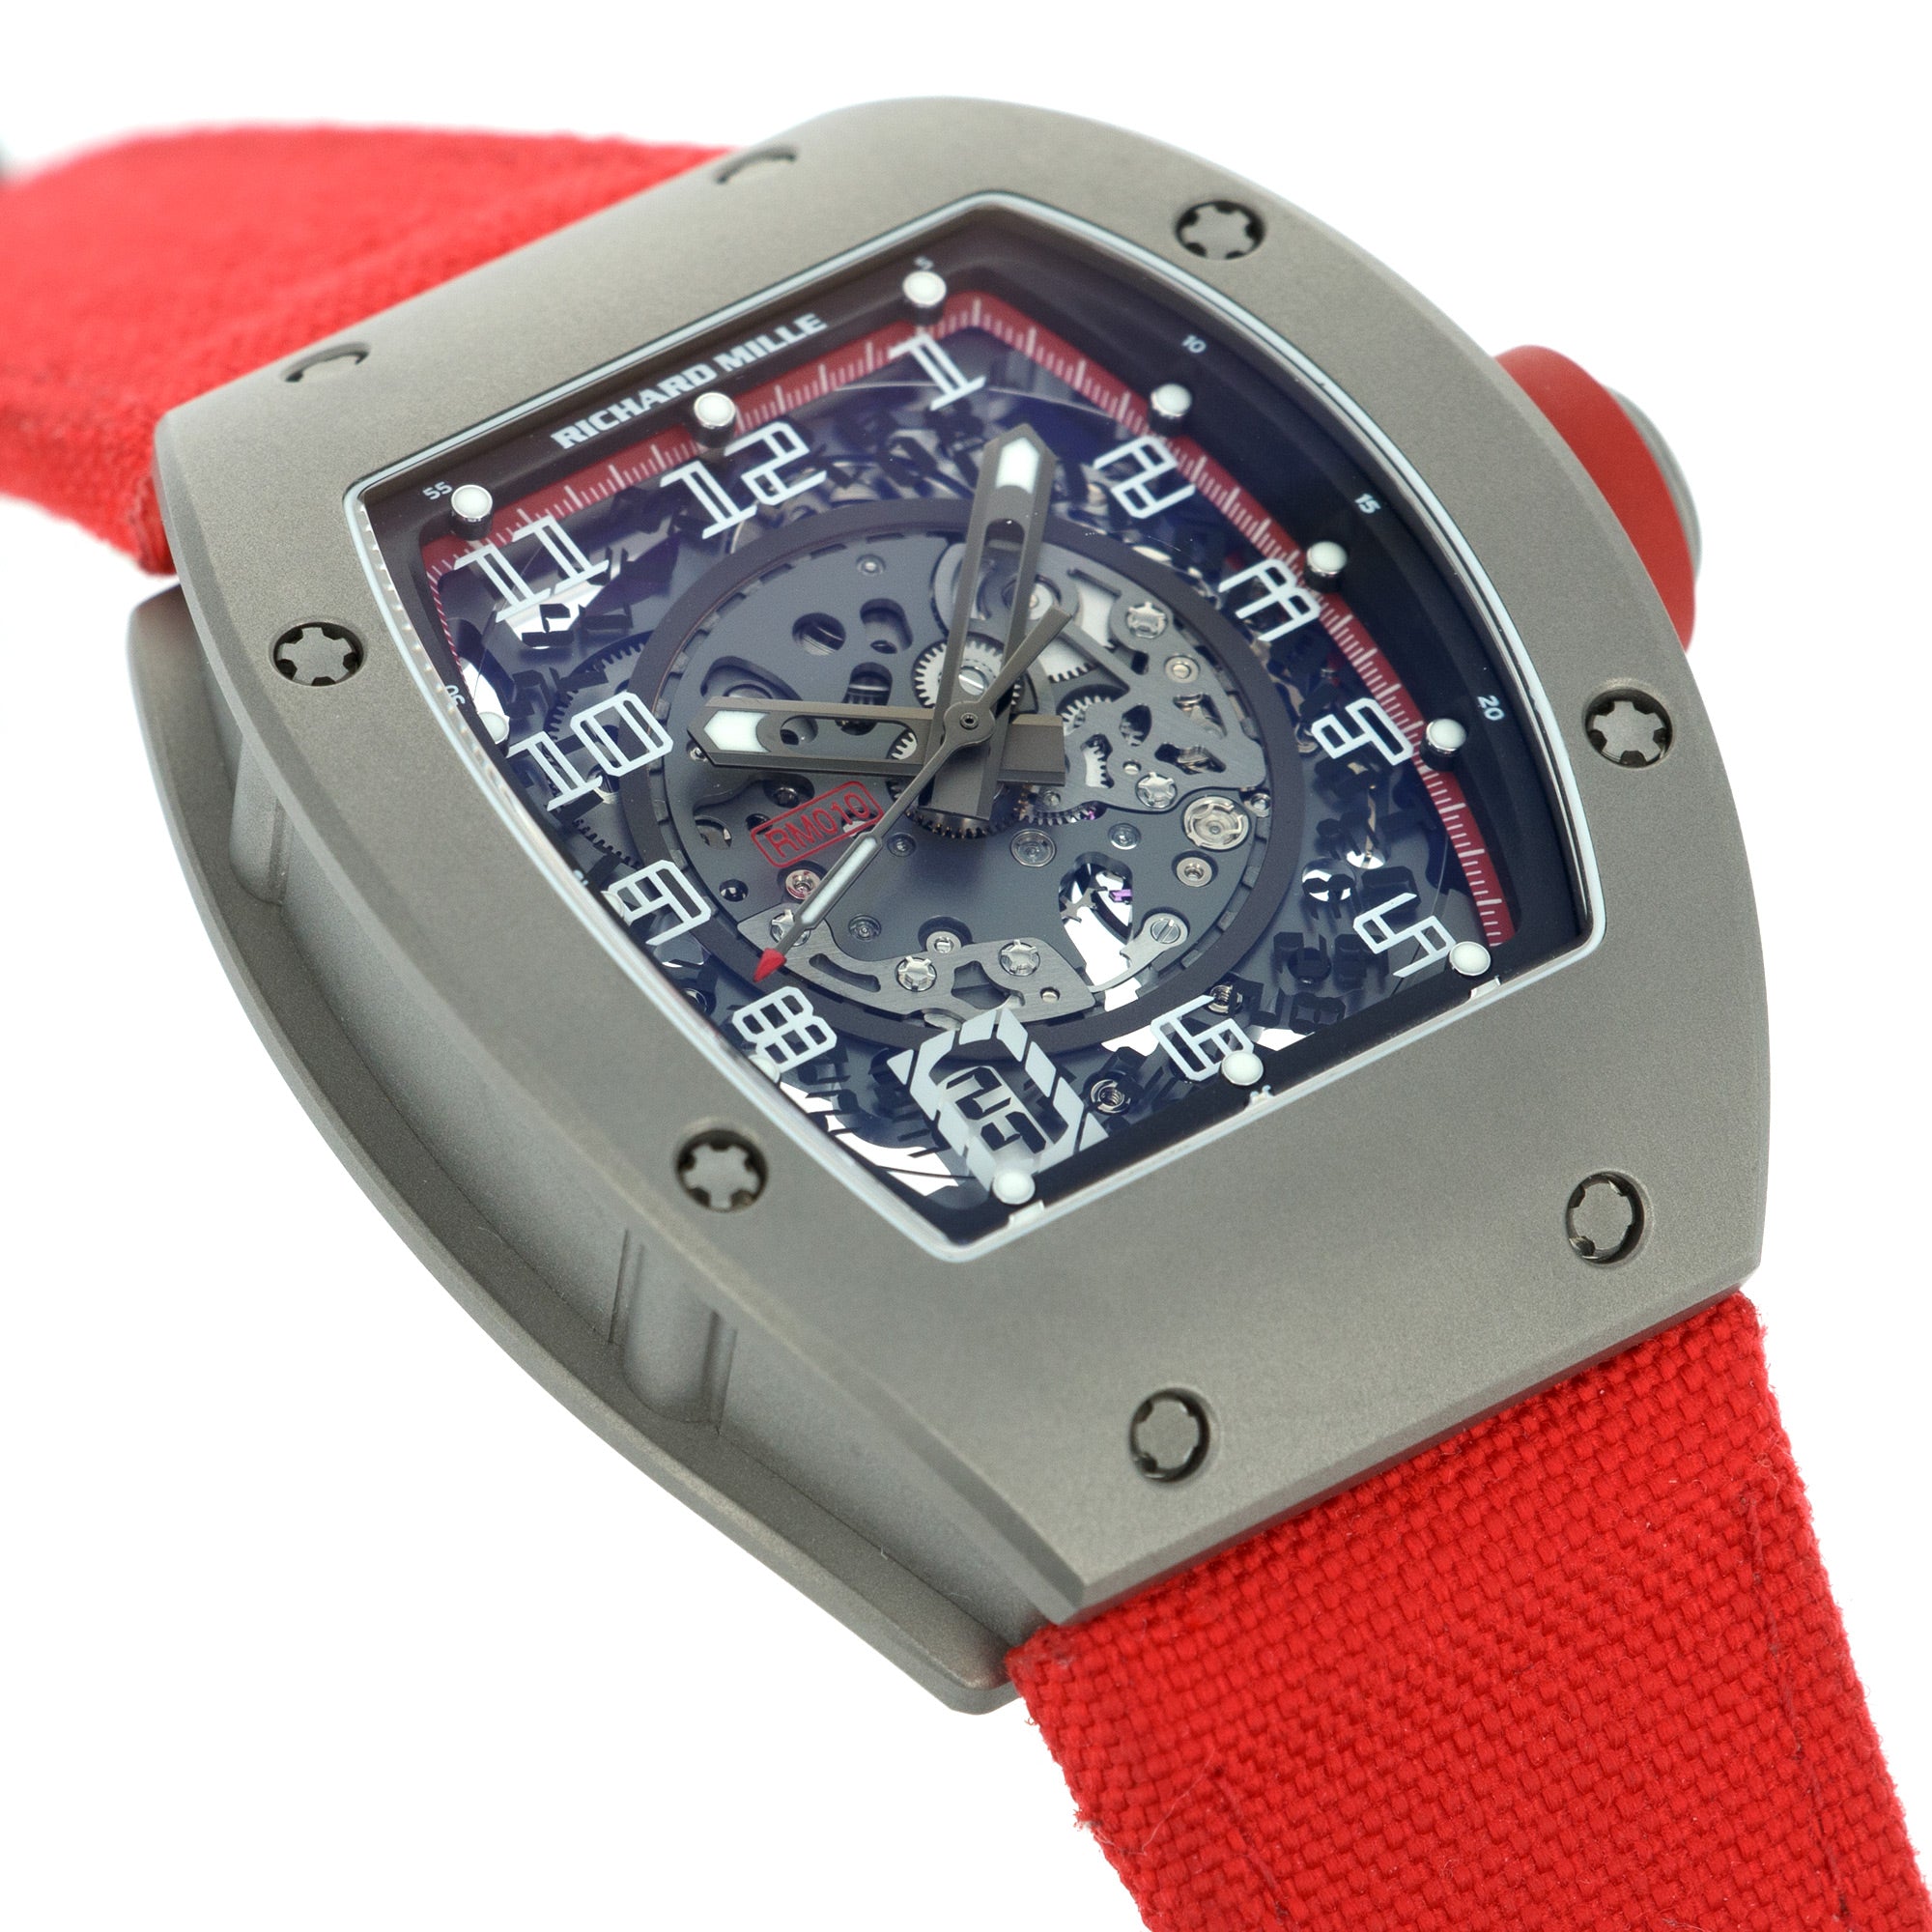 Richard Mille - Richard Mille RM010 Titanium, Limited Ginza Collection of 15 - The Keystone Watches